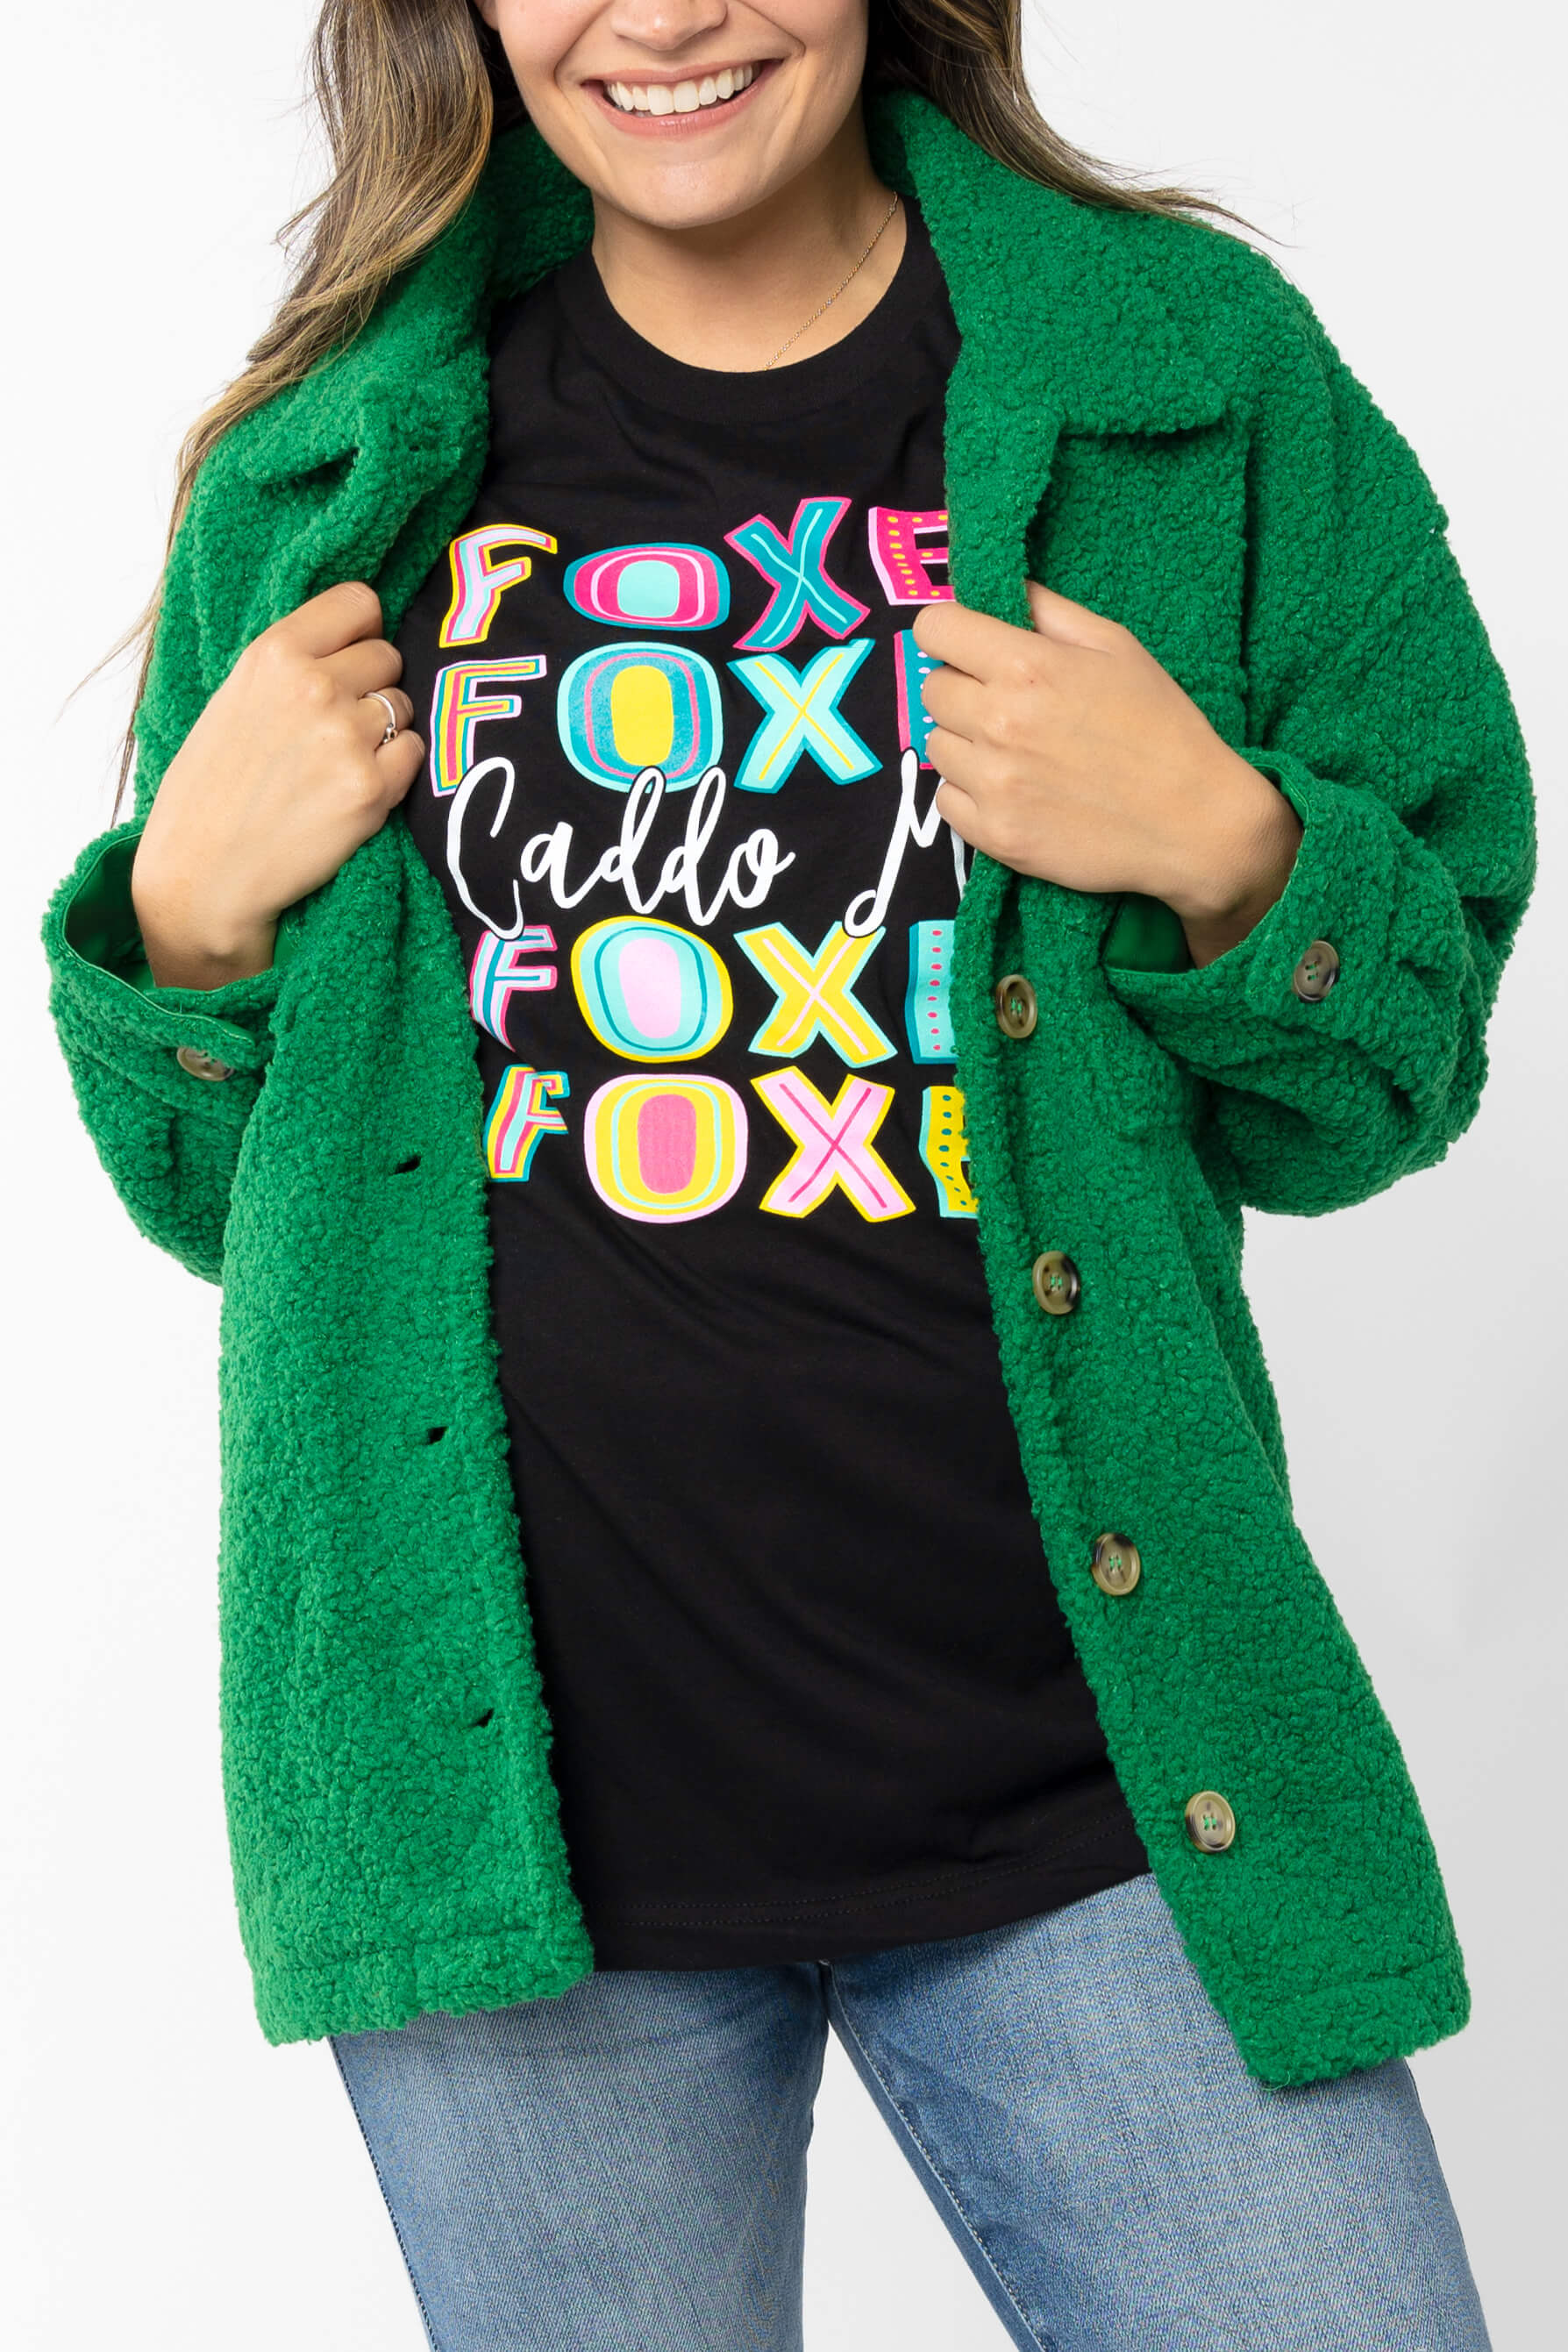 Graphic Tee - Caddo Mills Foxes Colorful Repeat